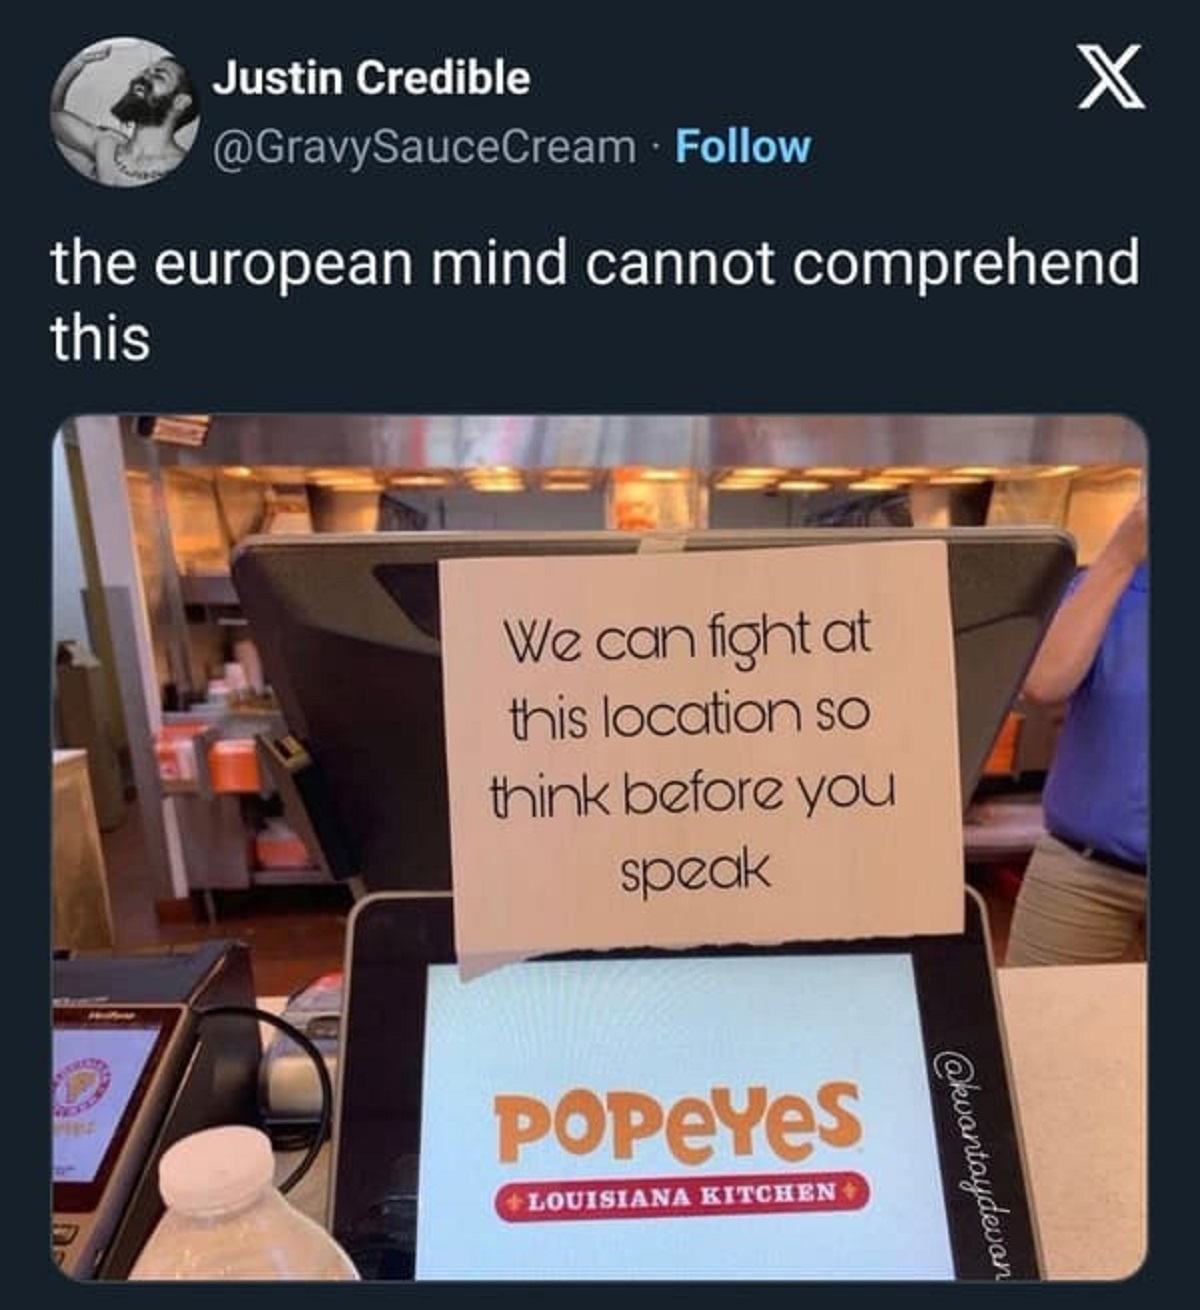 popeyes we can fight at this location - Justin Credible X the european mind cannot comprehend this We can fight at this location so think before you speak Popeyes Louisiana Kitchen